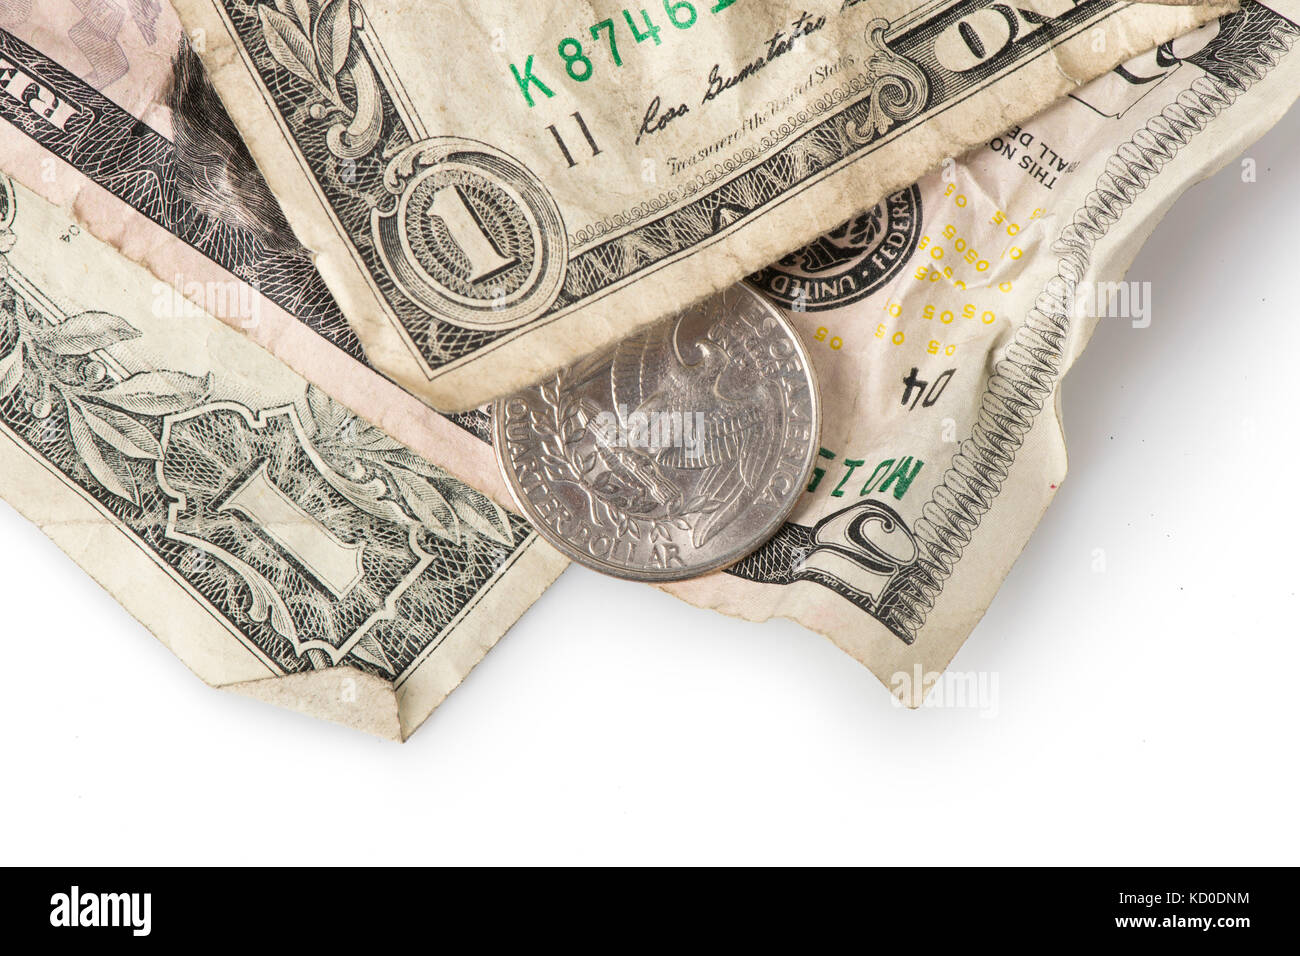 Wrinkled dollar bills and a quarter adding up to $7.25, the current (as of 2016) U.S. Federal Minimum wage. Stock Photo